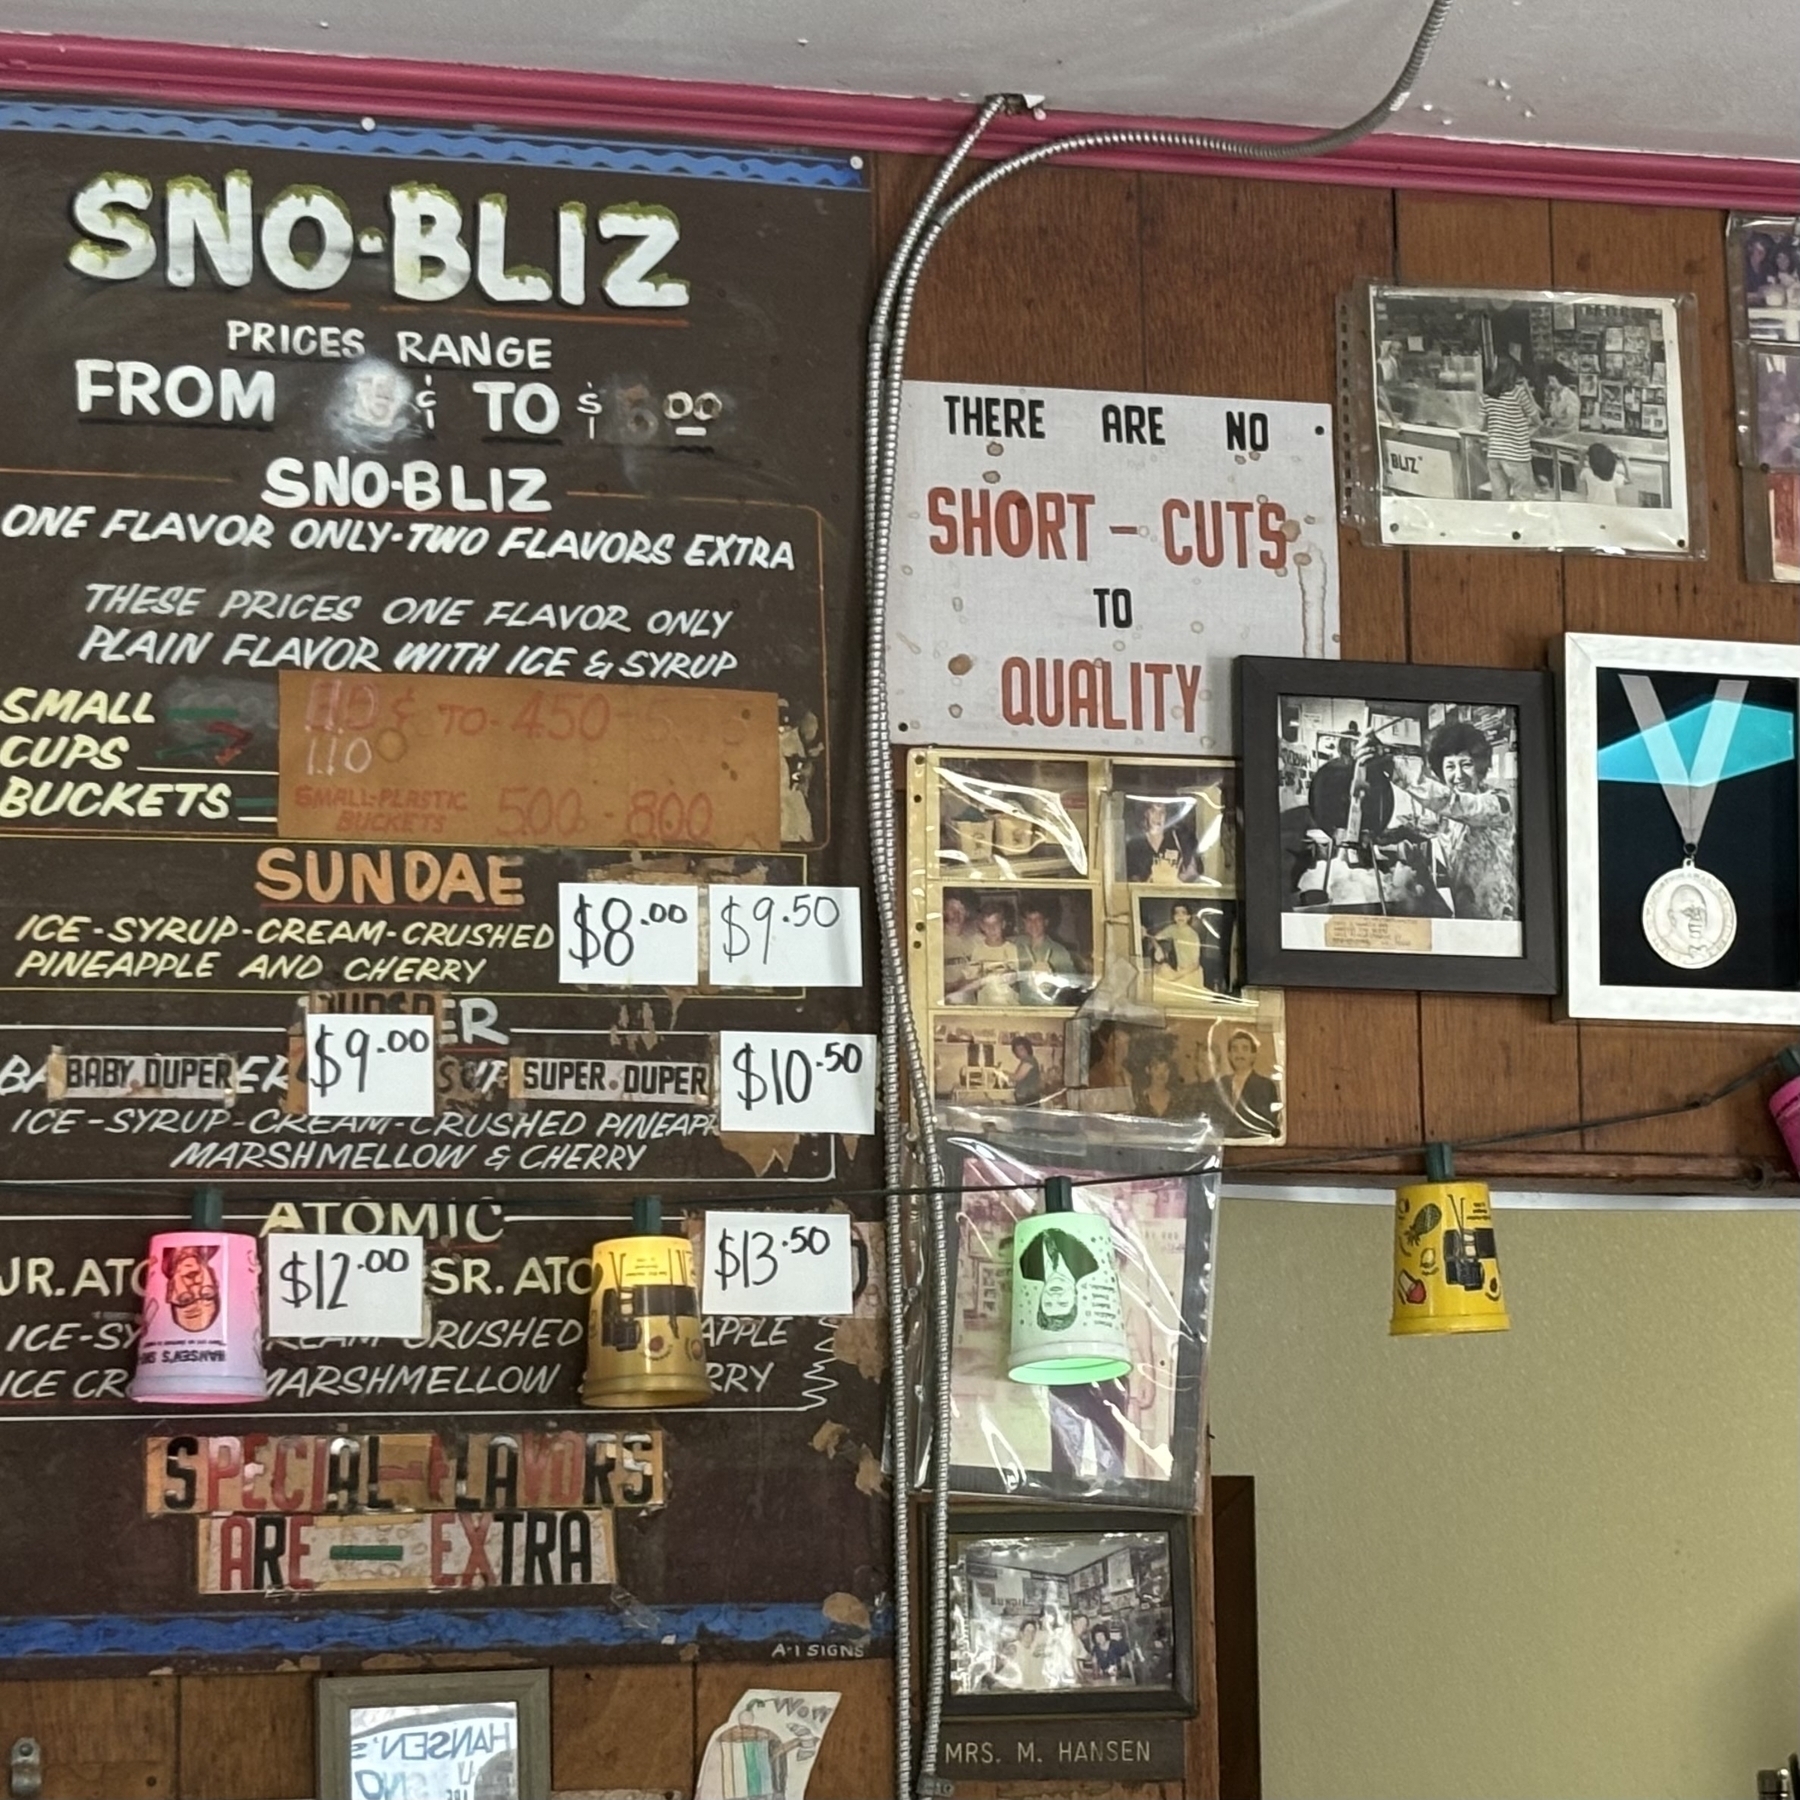 The wall of Hansen's Sno-Bliz on Tchopitoulas St. in New Orleans, LA. It is a mosaic of various signs and framed images, including: a menu, black & white photographs, a framed James Beard Award, and a sign that reads, 